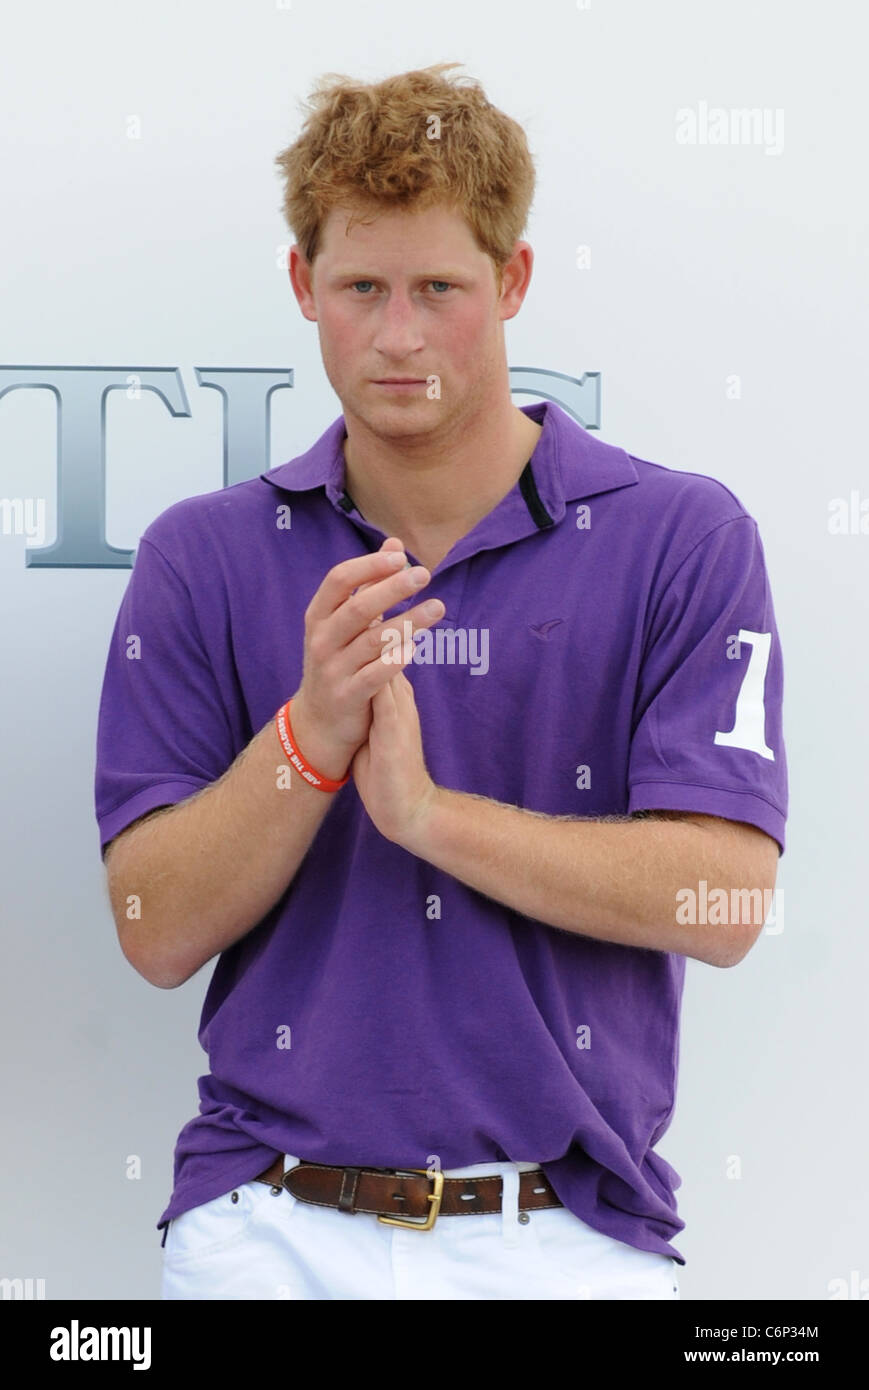 Prince Harry during the Asprey World Class Cup at Hurtwood Park Polo Club  in Surrey Surrey, England - 17.07.10 Stock Photo - Alamy